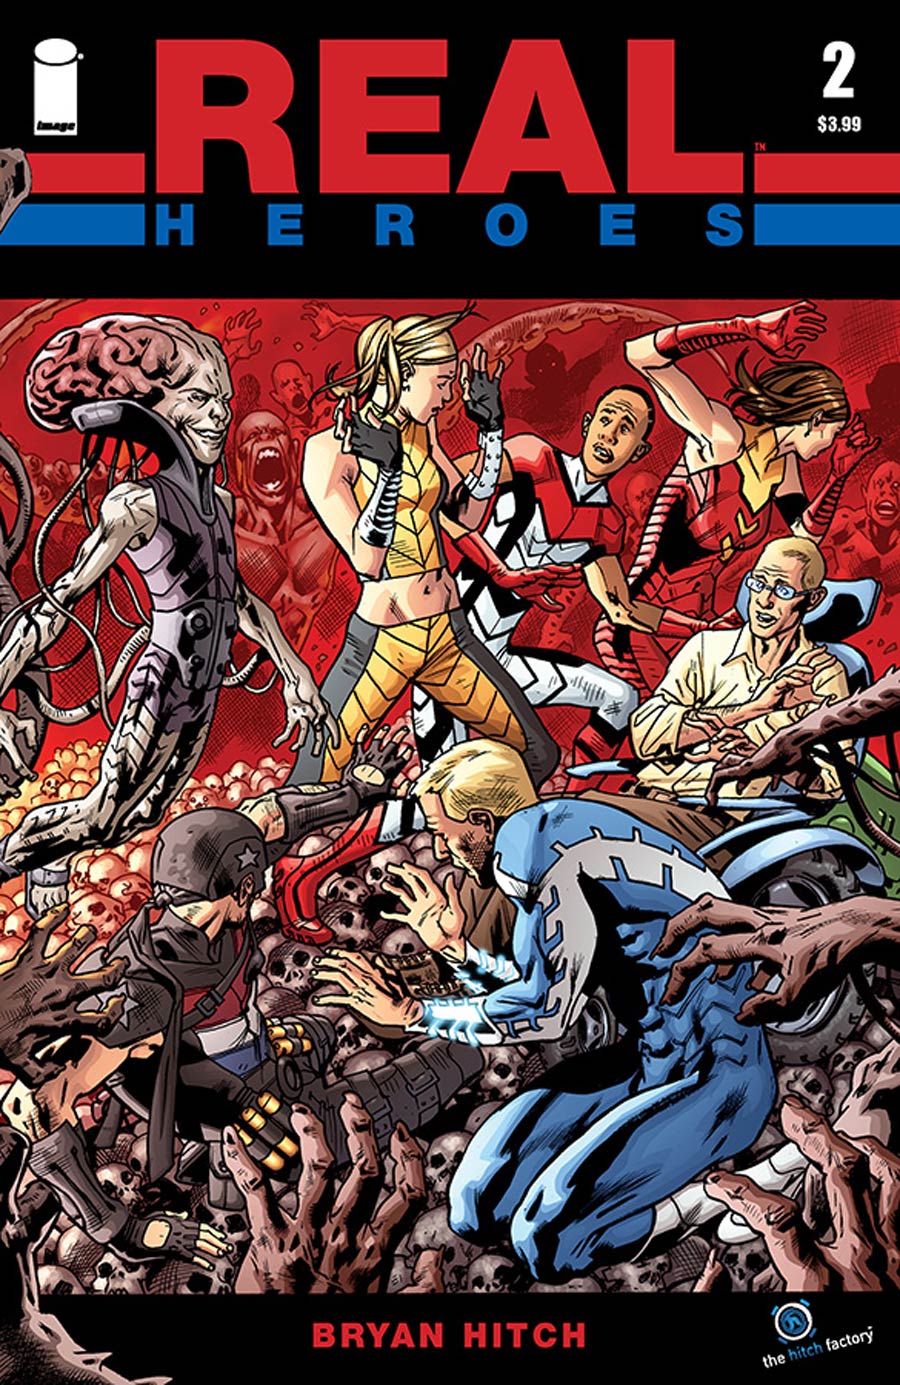 Real Heroes #2 Cover A Bryan Hitch